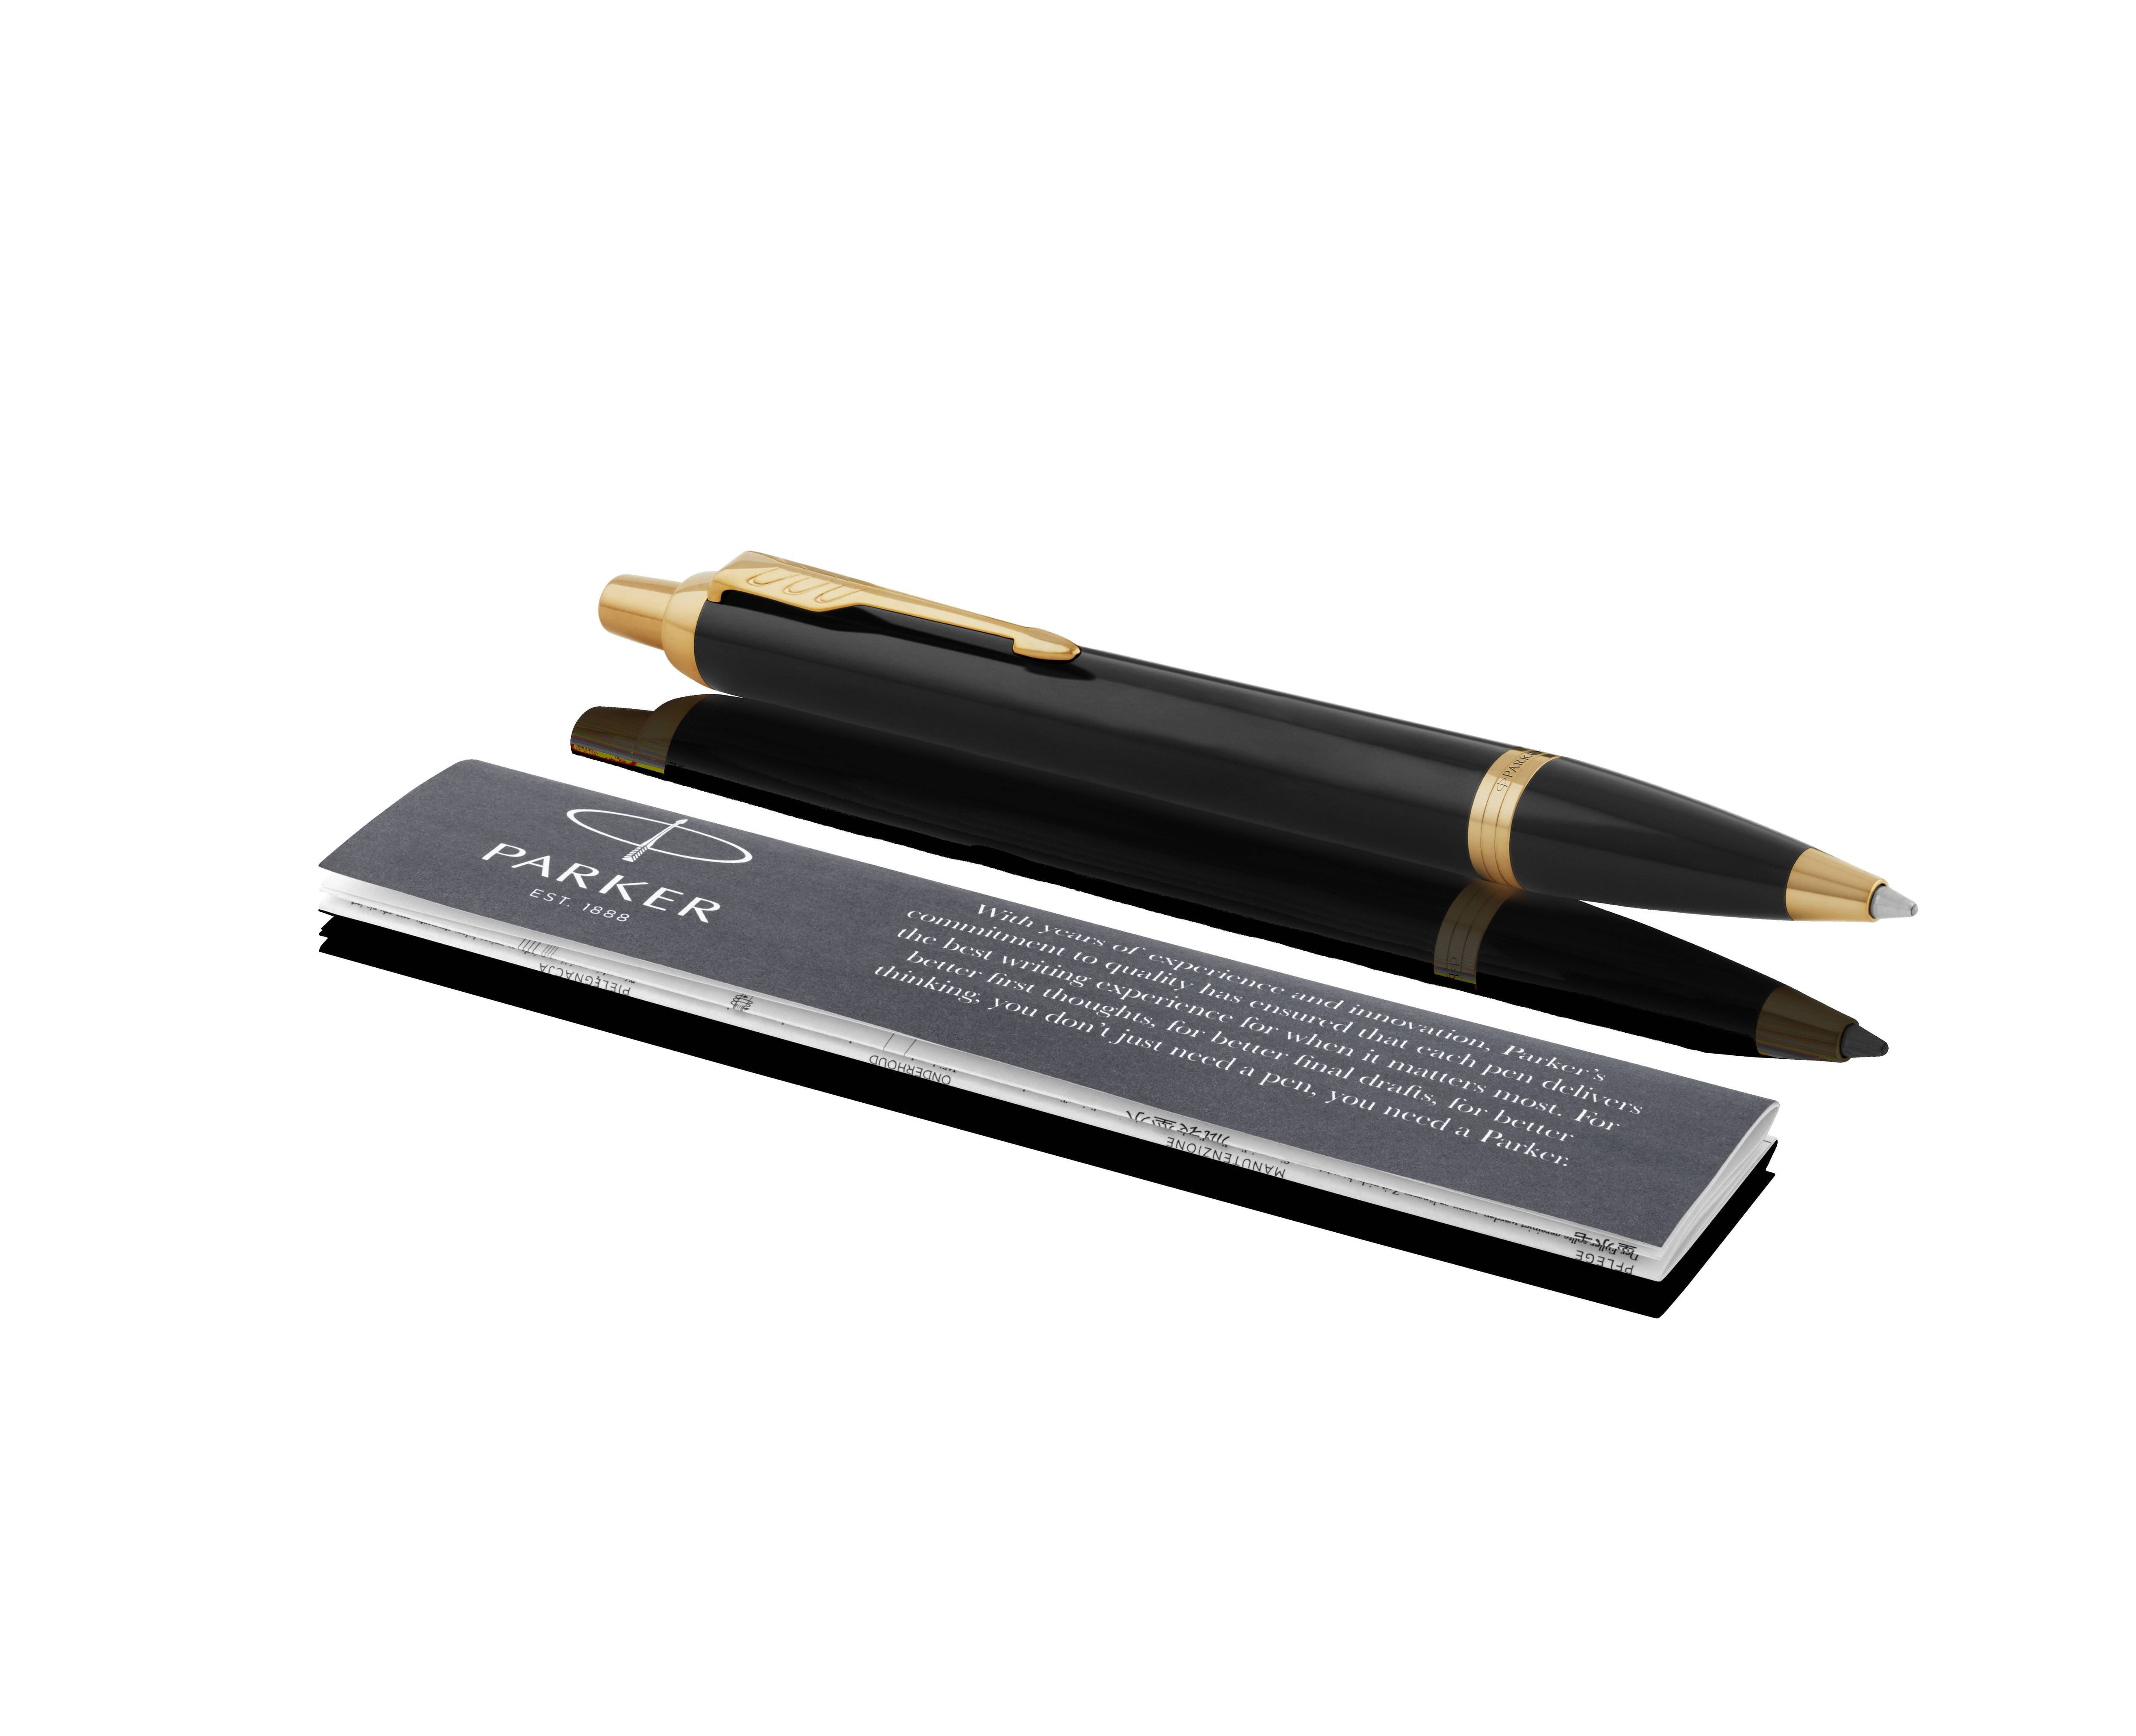 Details about   4 PEN PARKER CLASSIC MATTE BLACK GOLD TRIM BALL PEN WITH FREE WORLDWIDE SHIPPING 